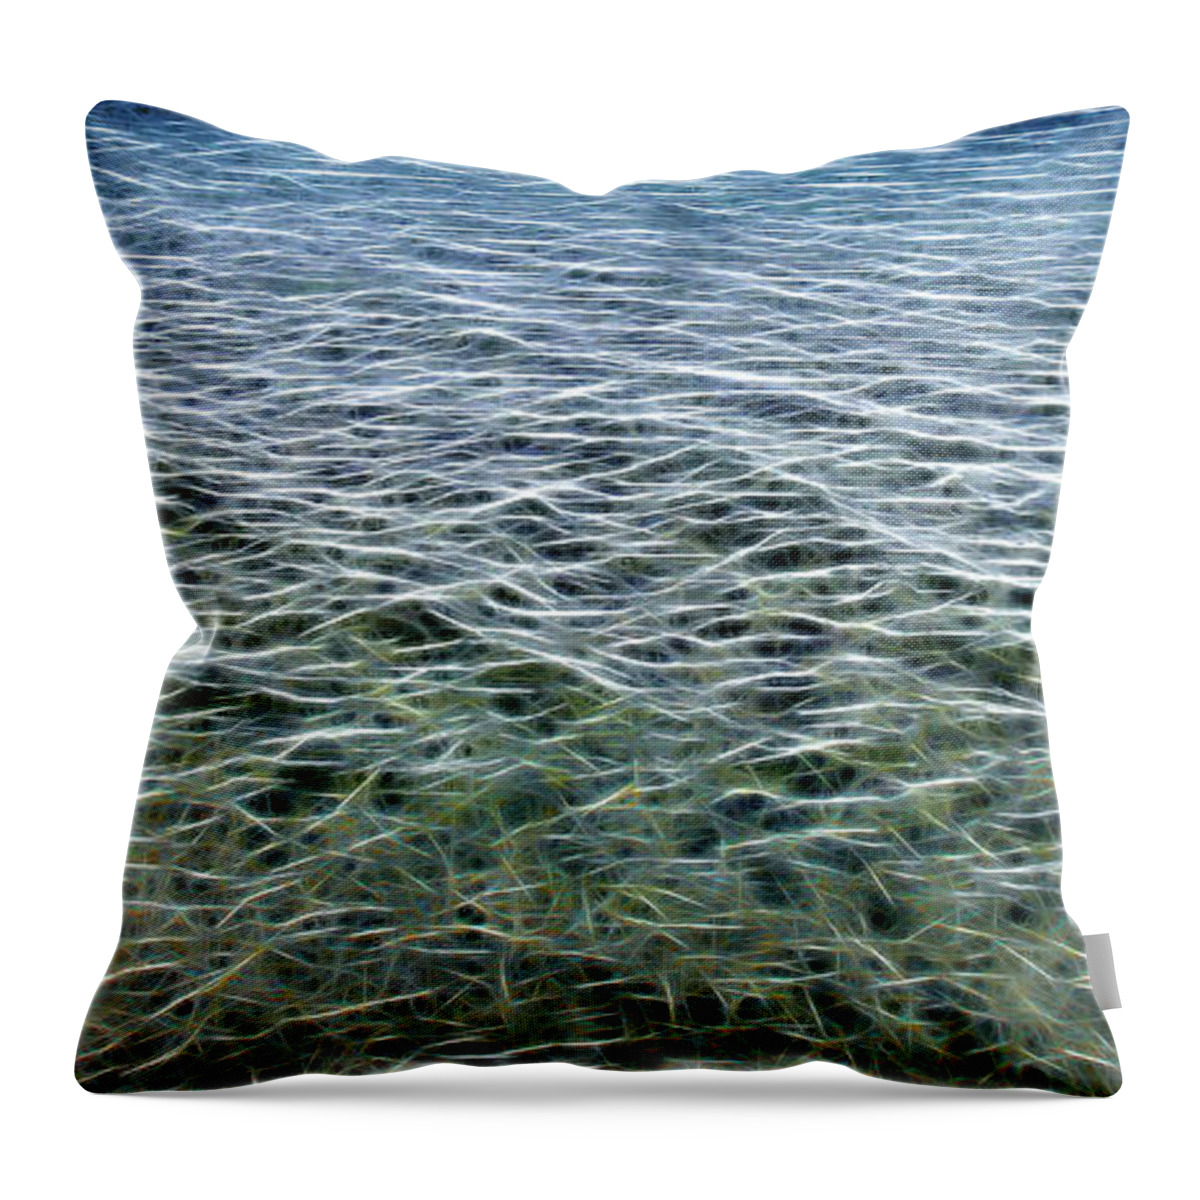 Abstract Throw Pillow featuring the digital art Sea of Lines by Roy Pedersen